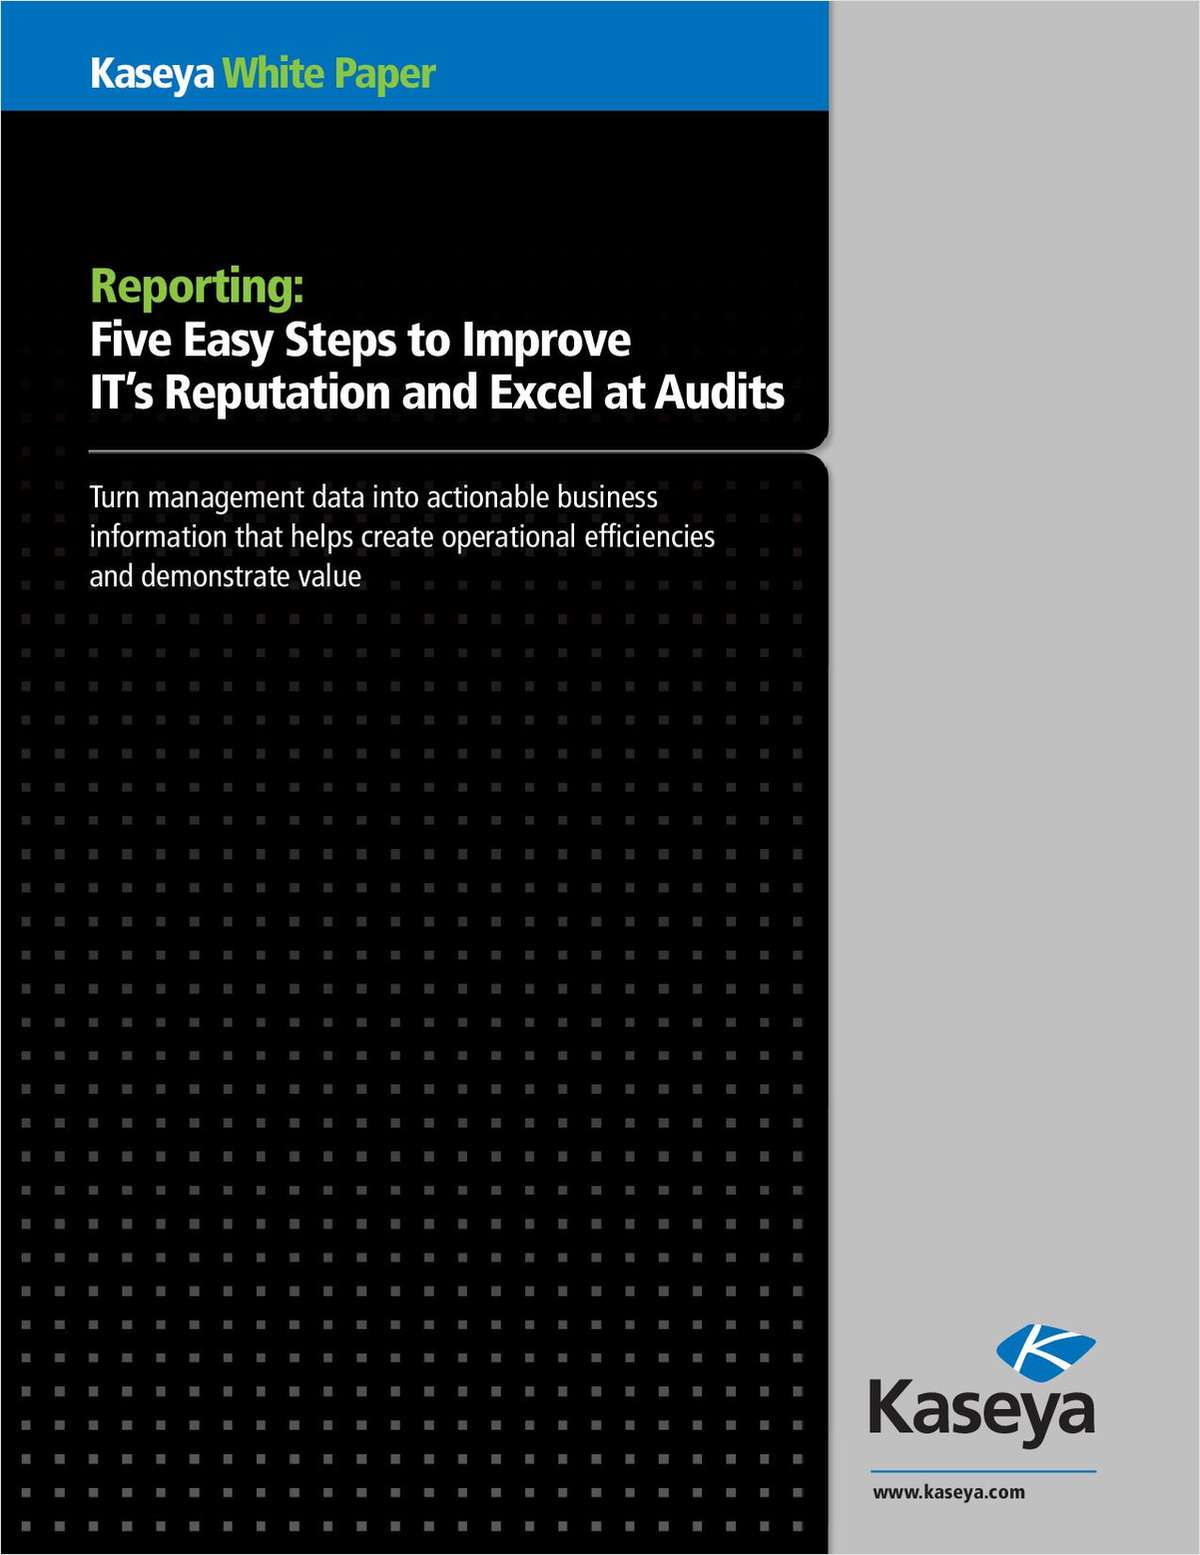 Five Easy Steps to Improve IT's Reputation and Excel at Audits